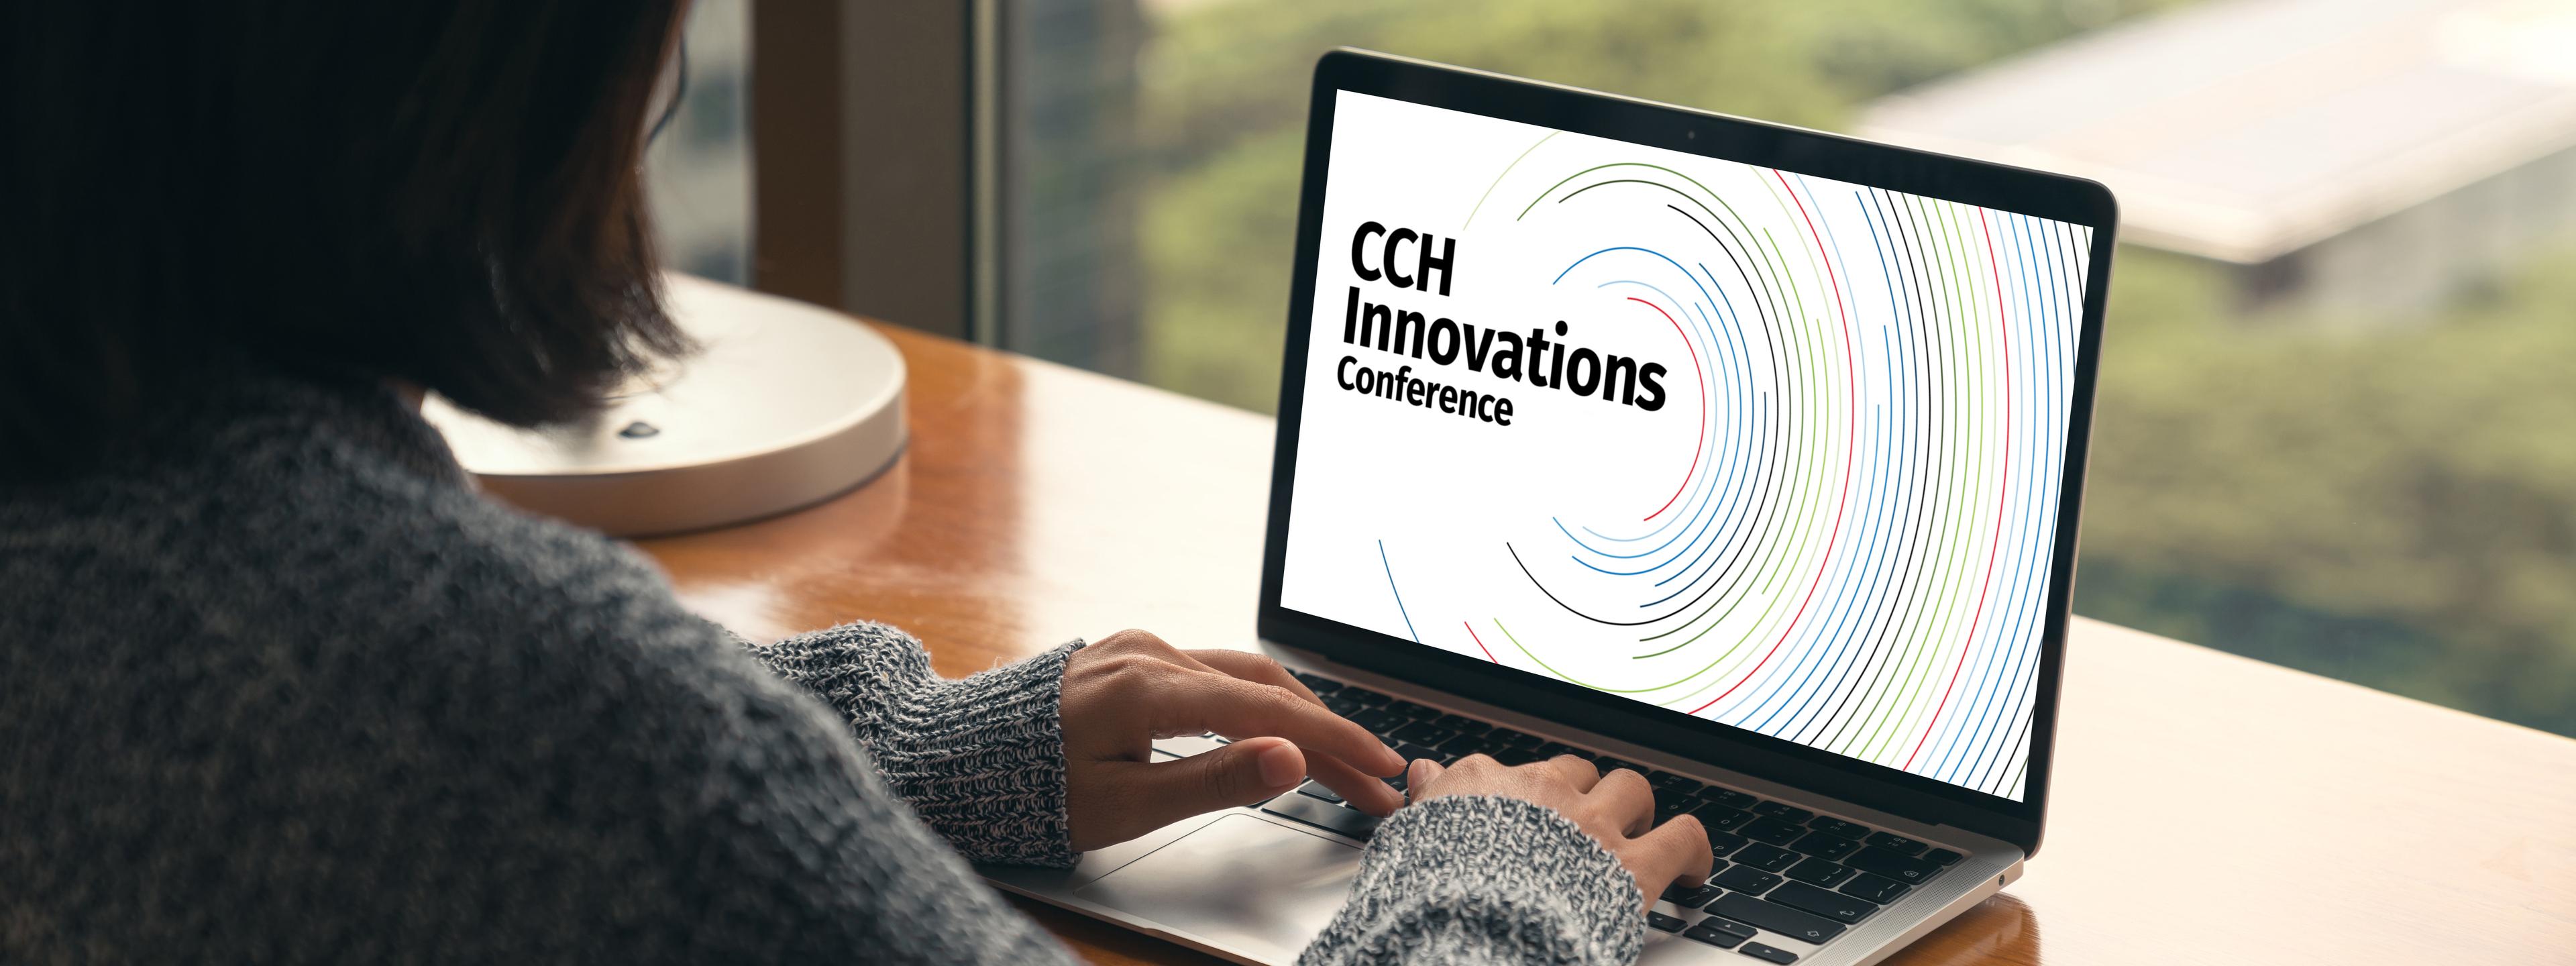 CCH Innovations Virtual Conference